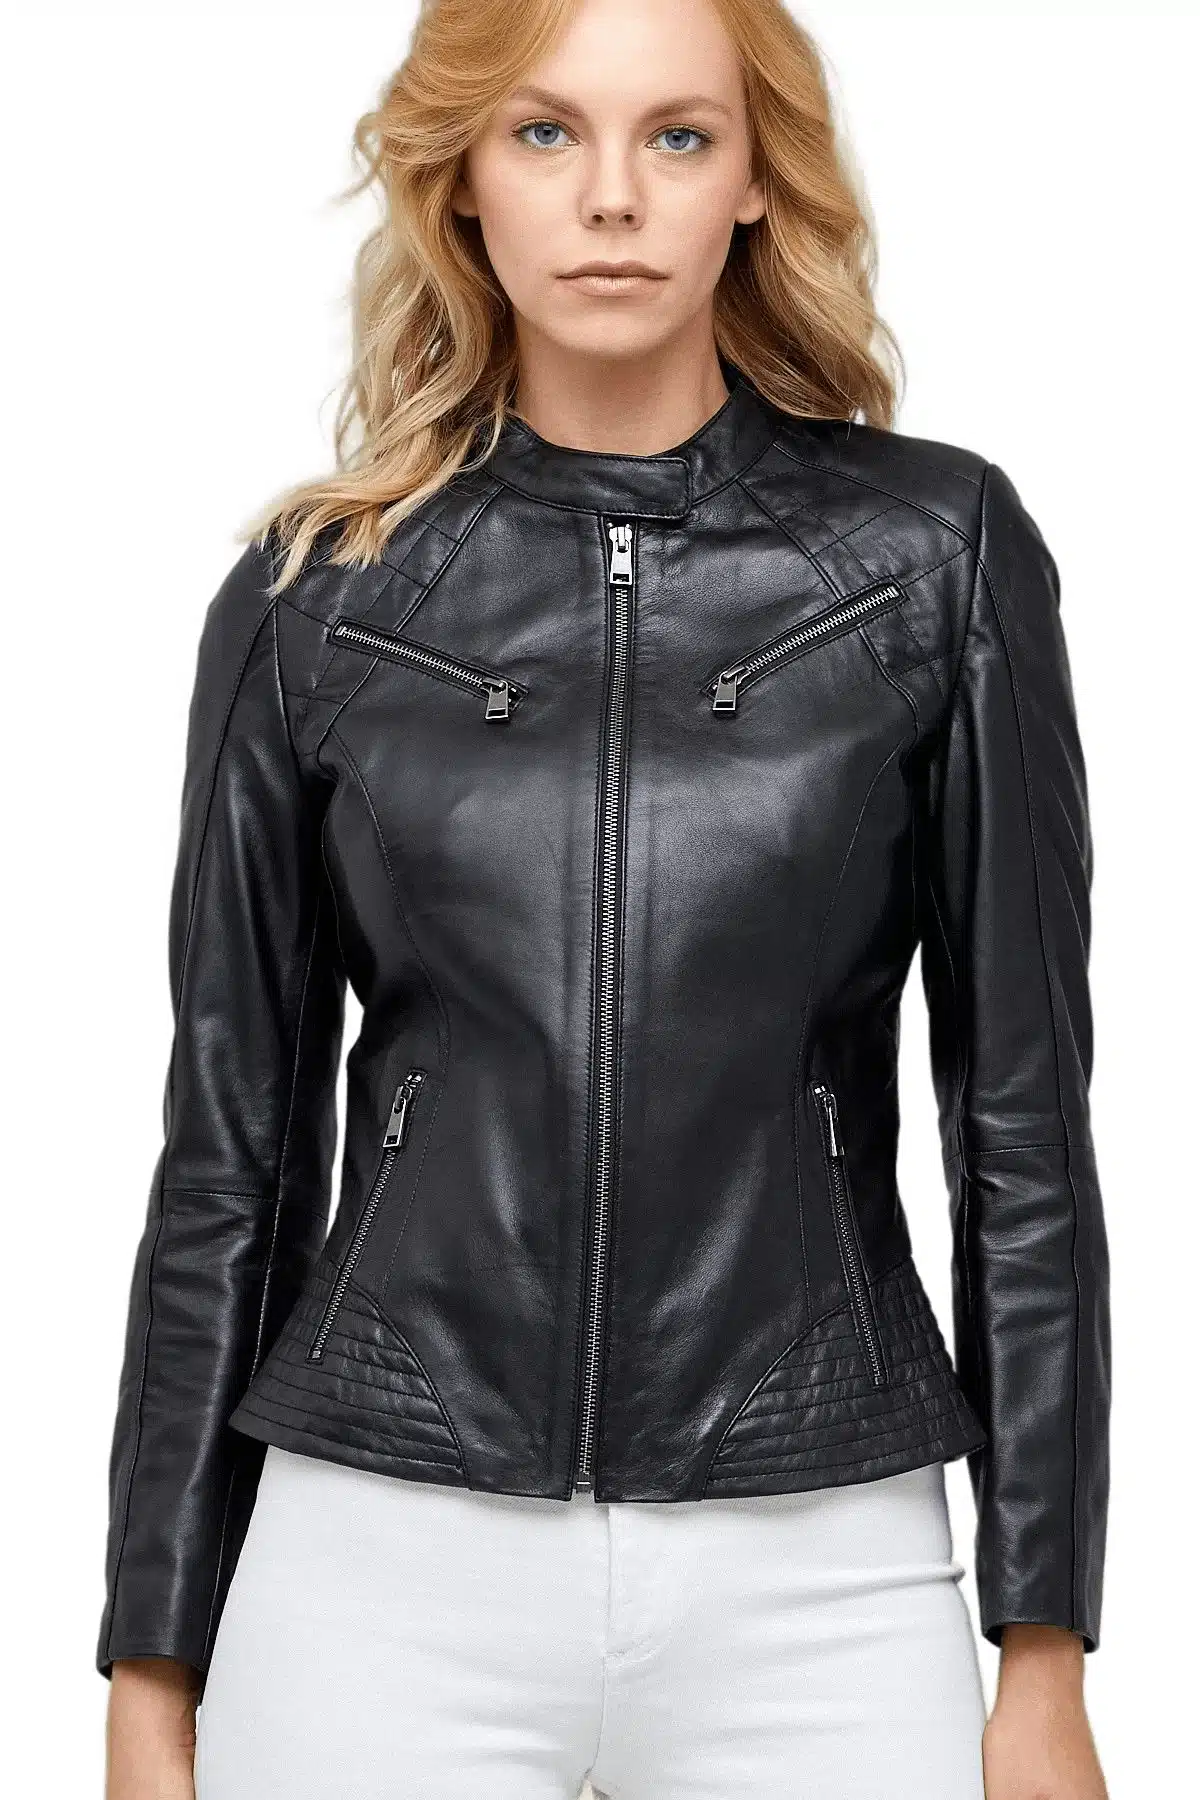 Millie Women's 100 % Real Black Leather Jacket